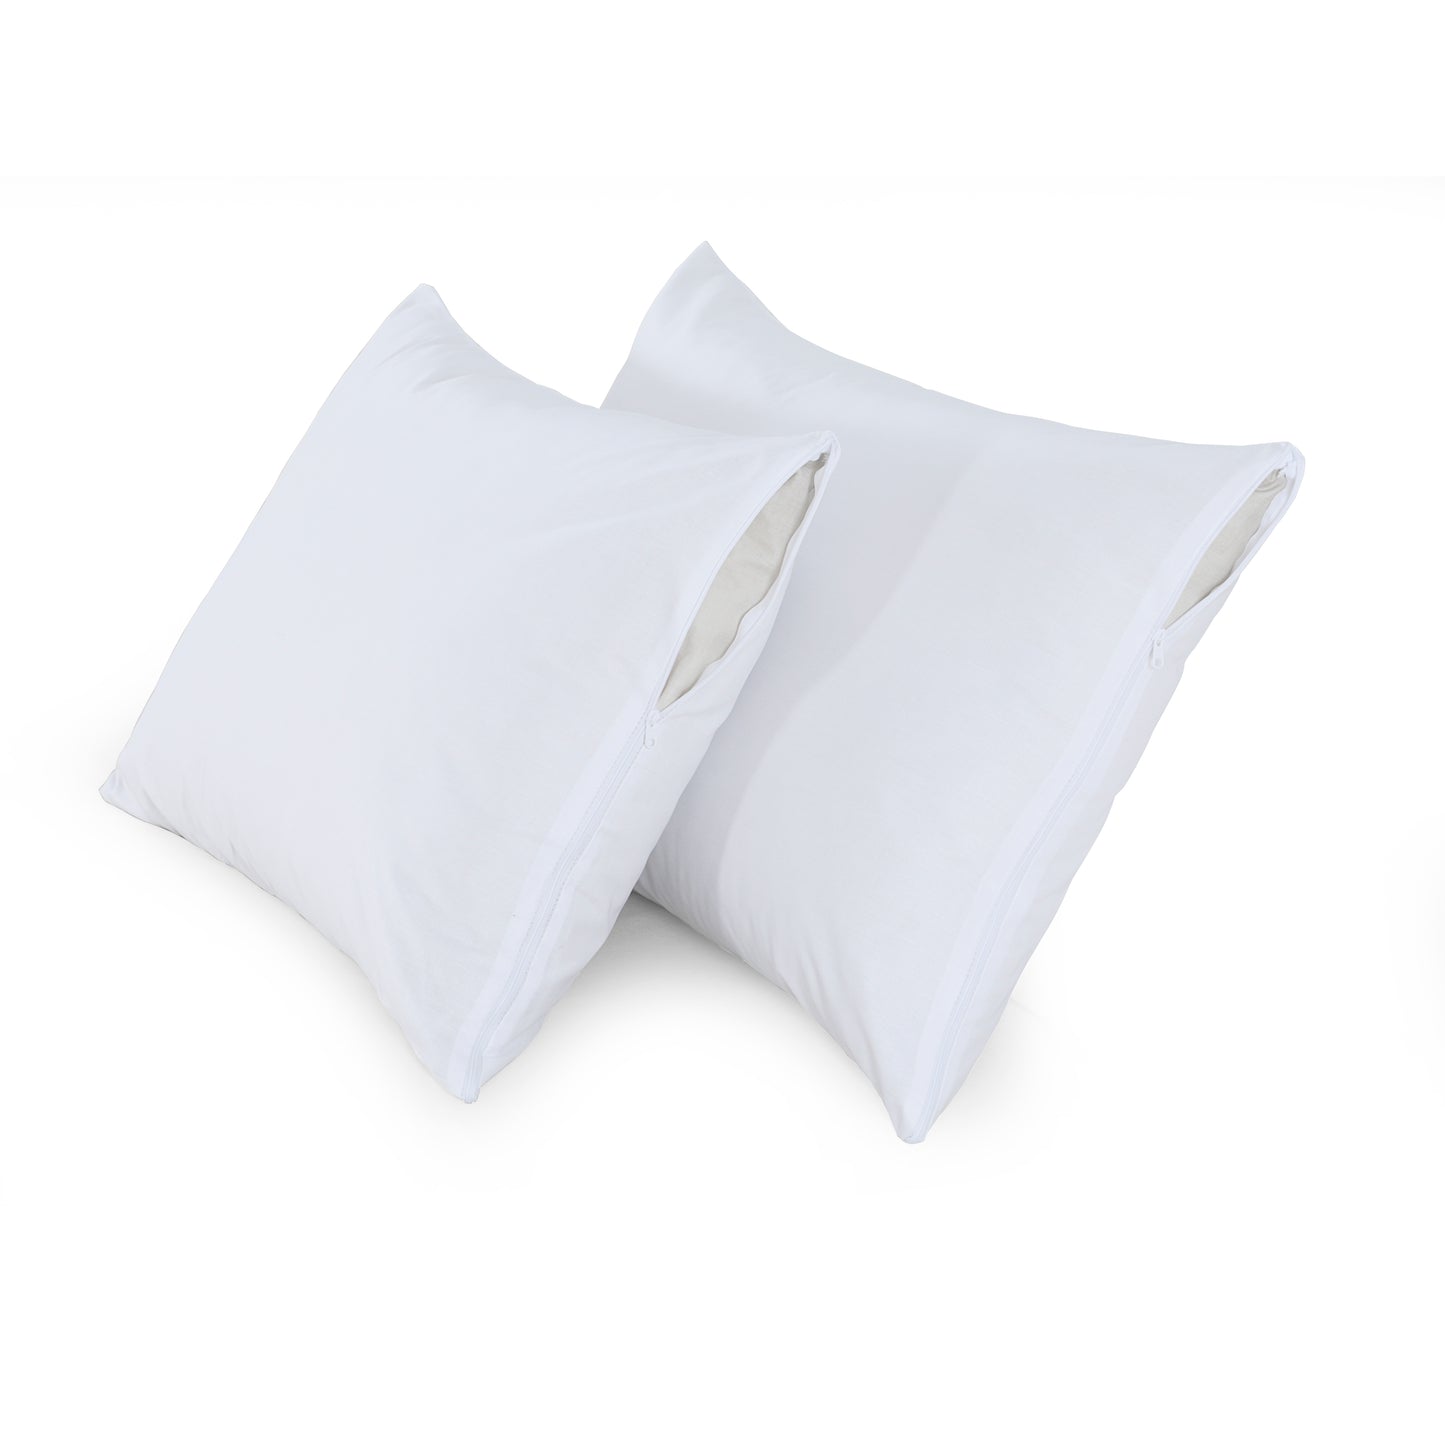 Pair of Pillow Protector Zipped Cotton Cover Washable Anti-Allergenic White Protector